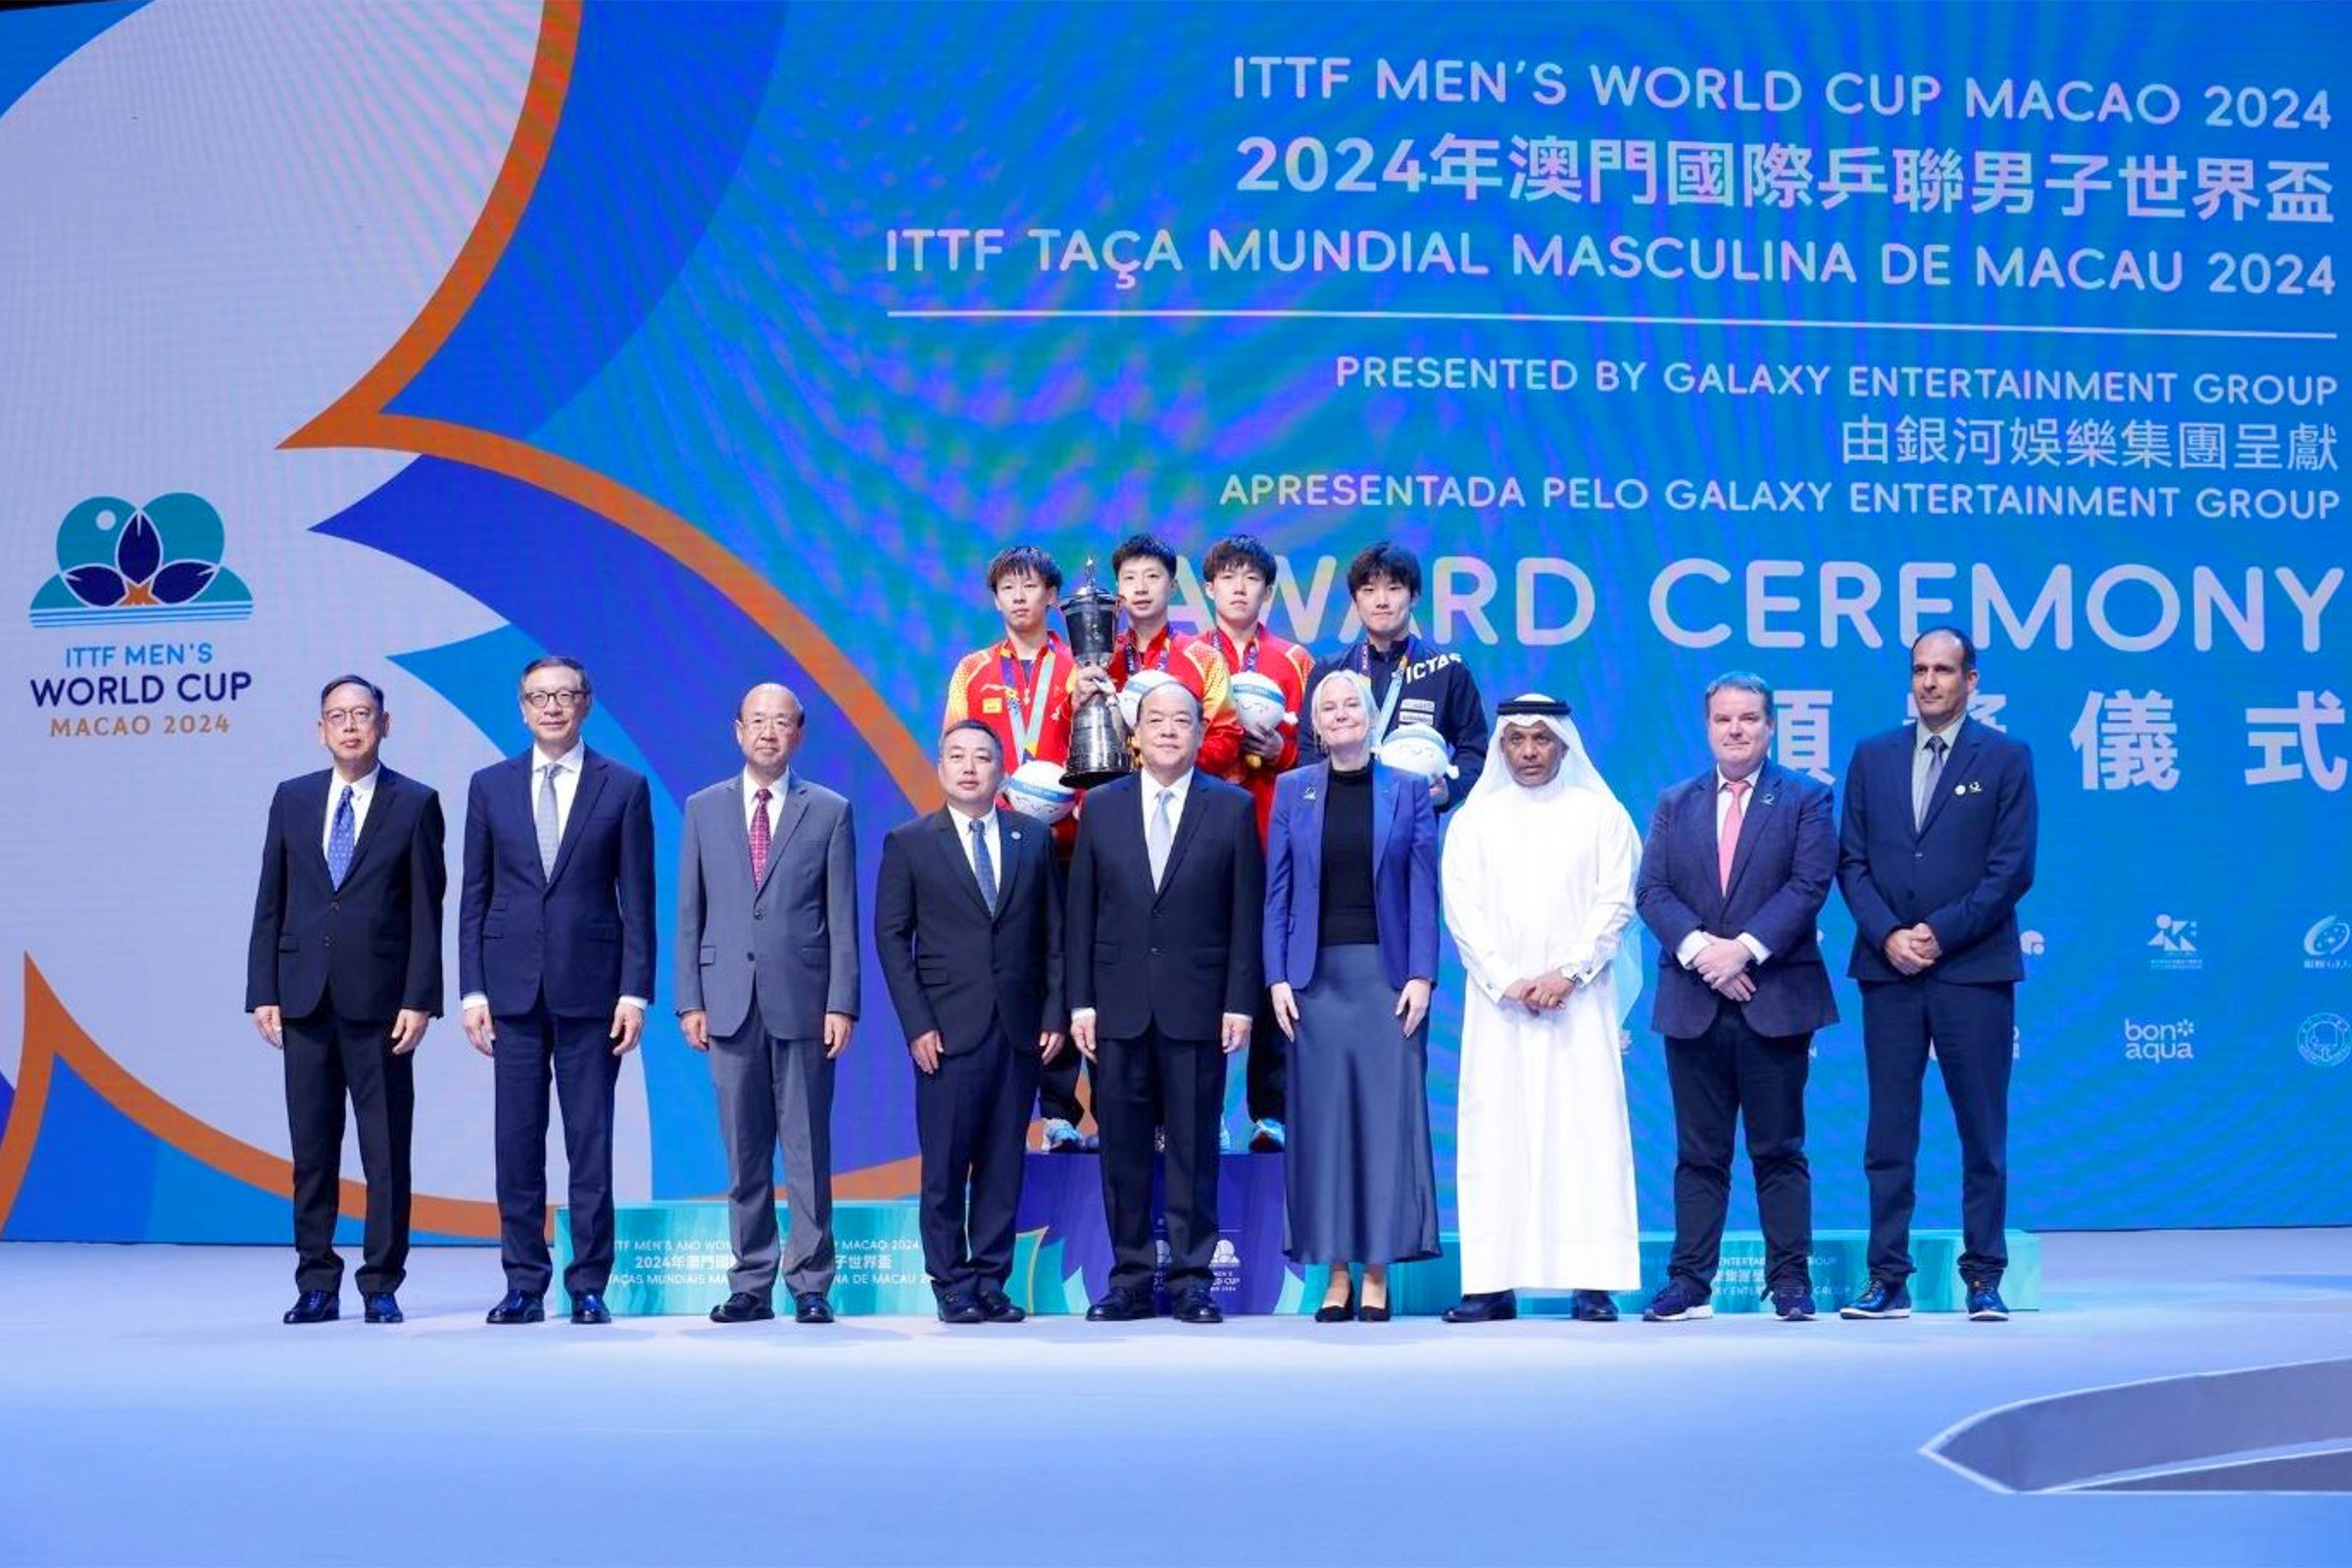 The officiating guests presented the awards to and took a photo with the ITTF Men’s World Cup champion, silver medalist and bronze medalist.